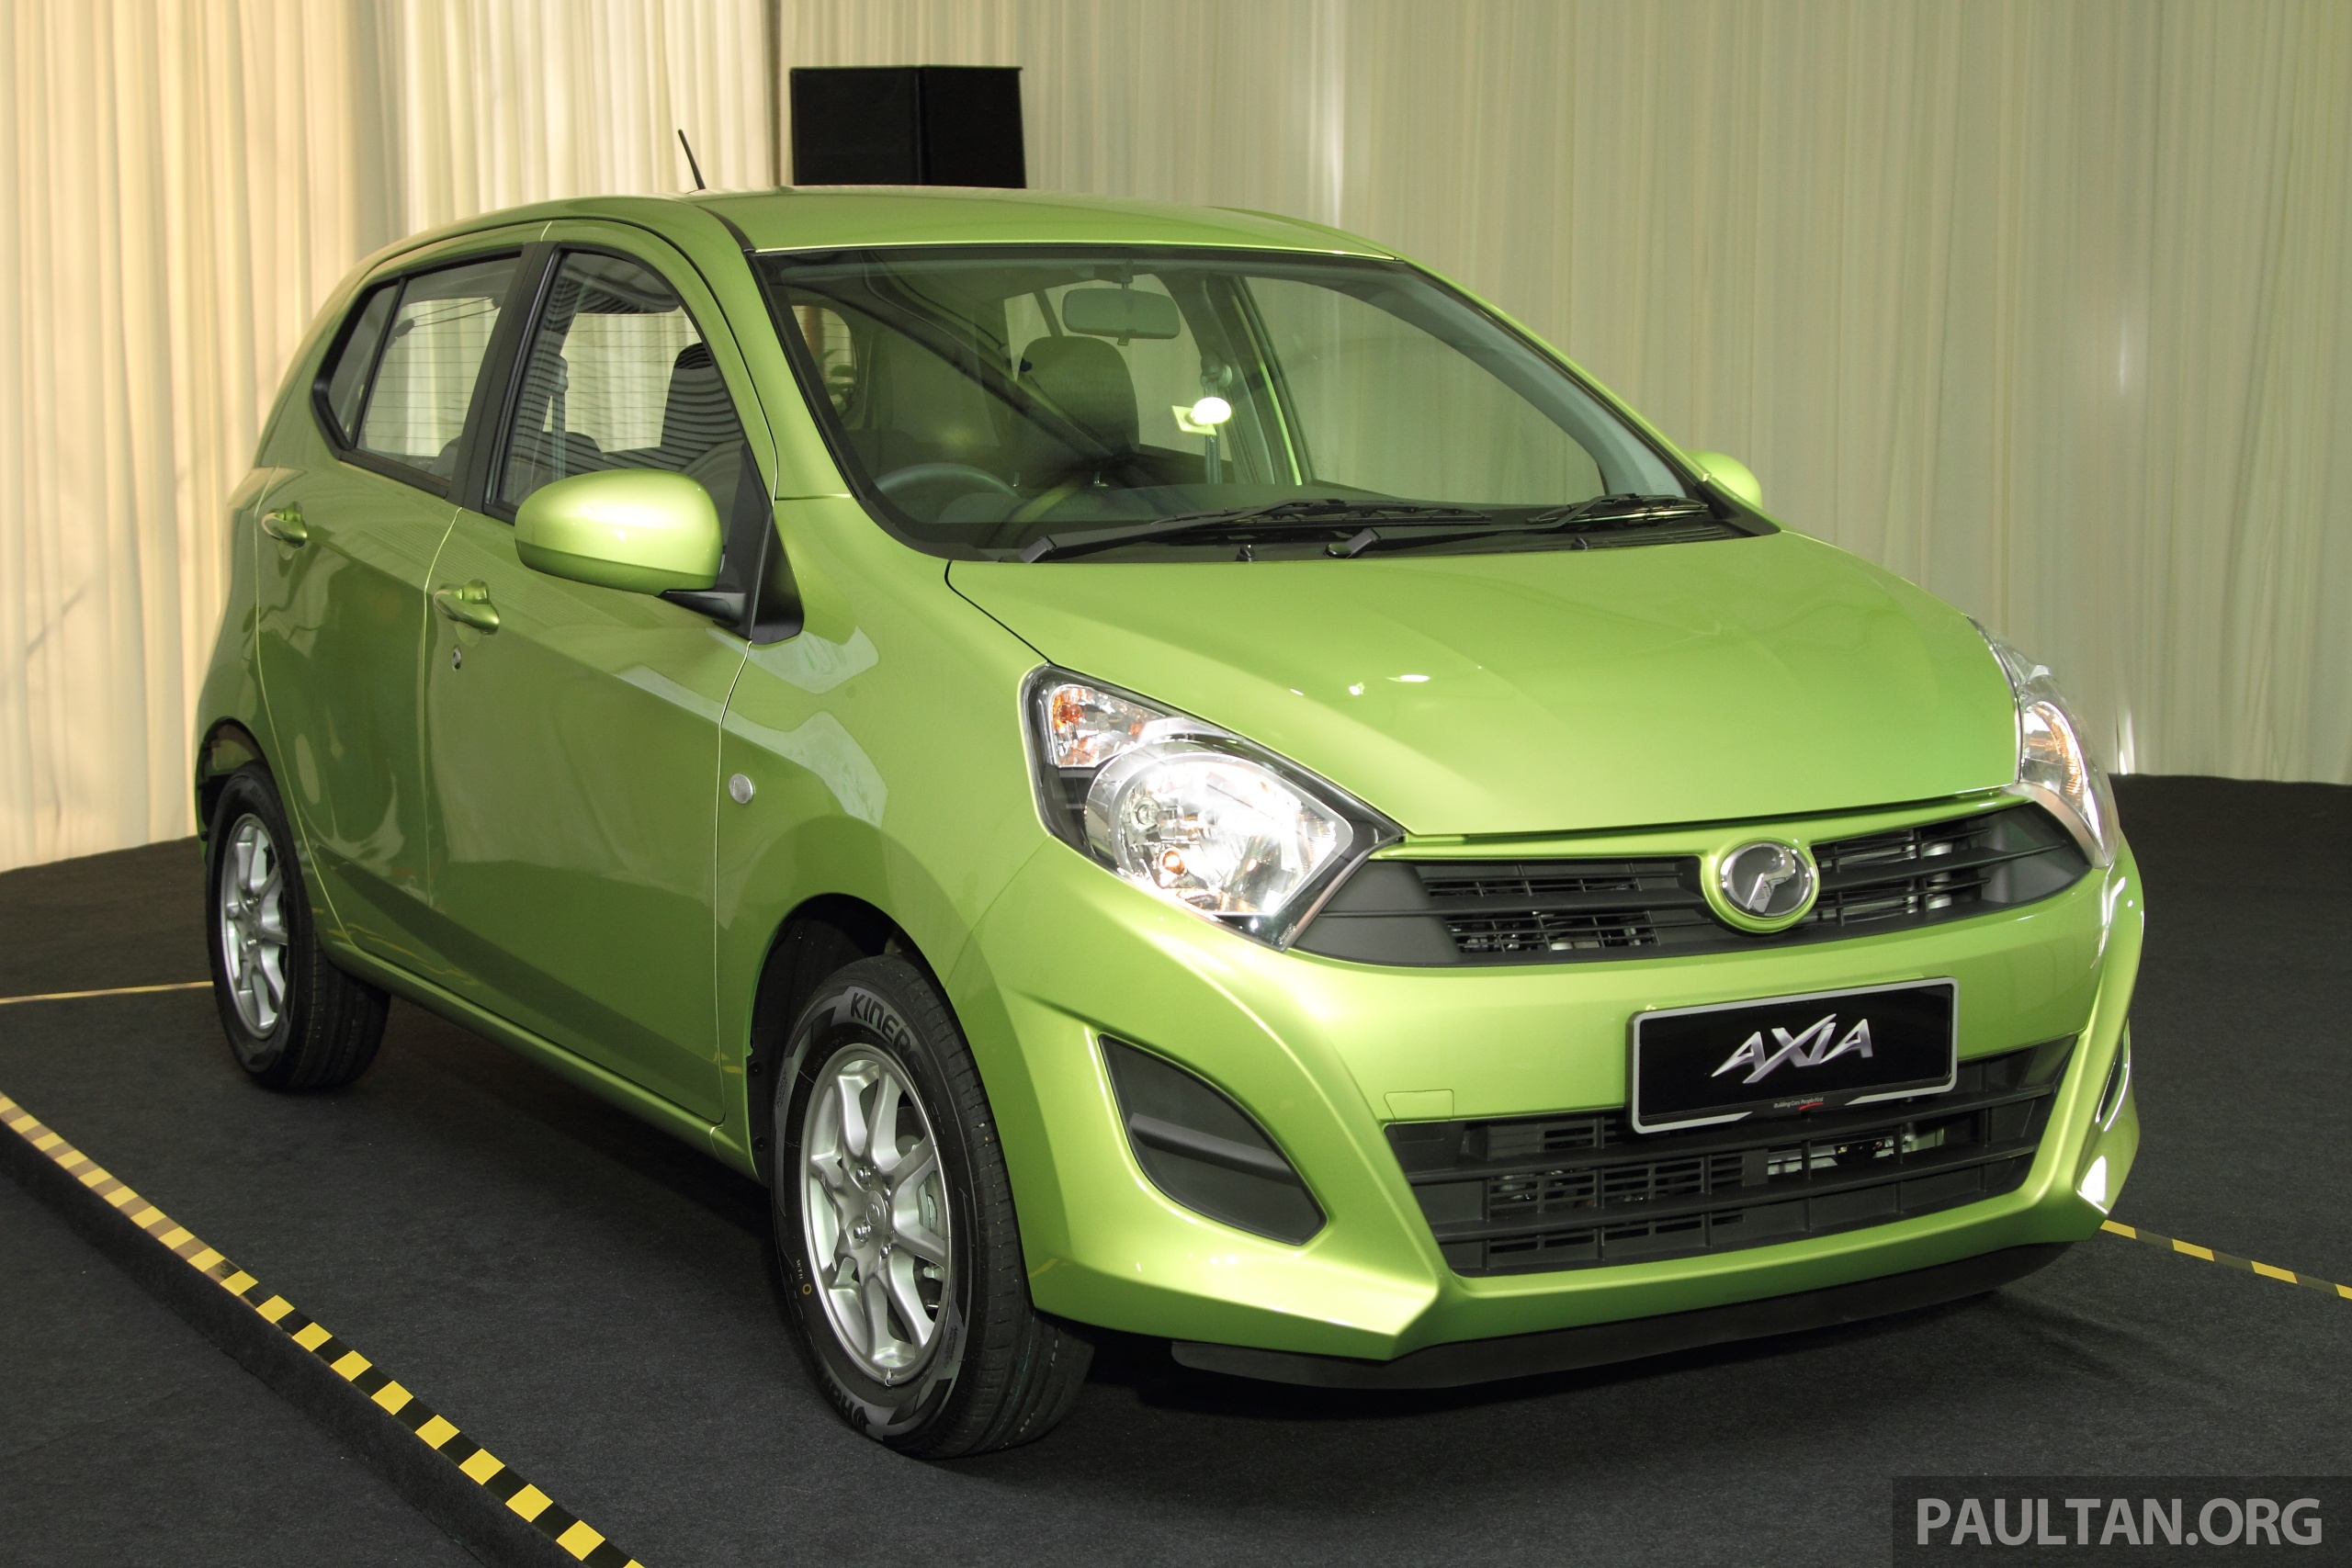 Perodua Axia 1.0 G  price raised by RM990 from Oct 1